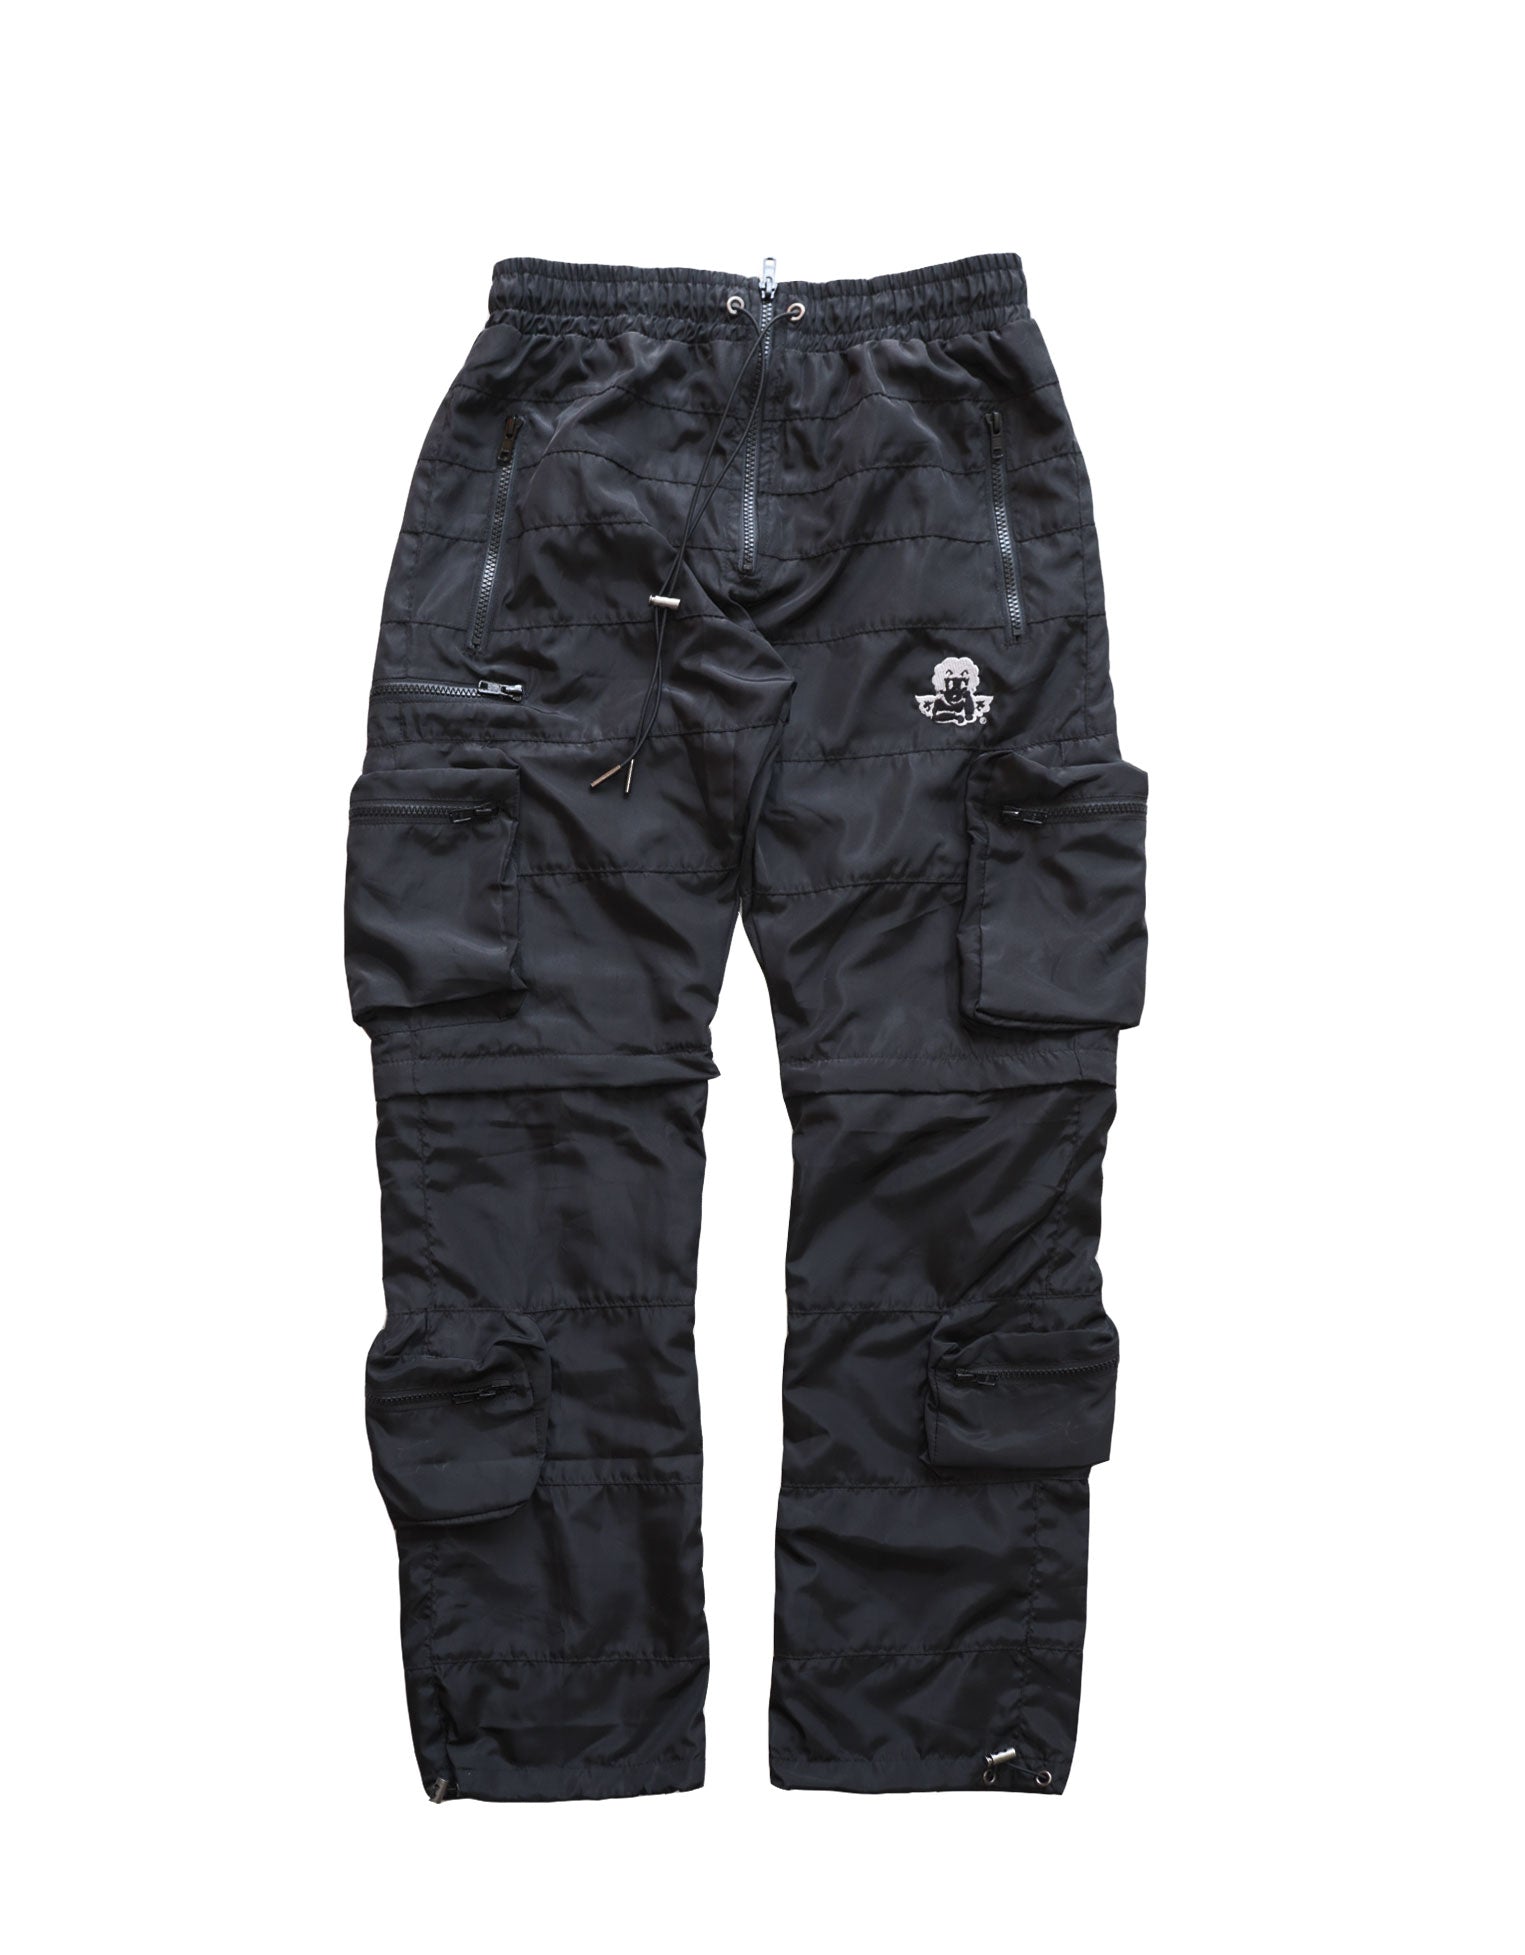 The Goods Clo- Convertible Utility Cargo Pants “Black” – THE GOODS CLO